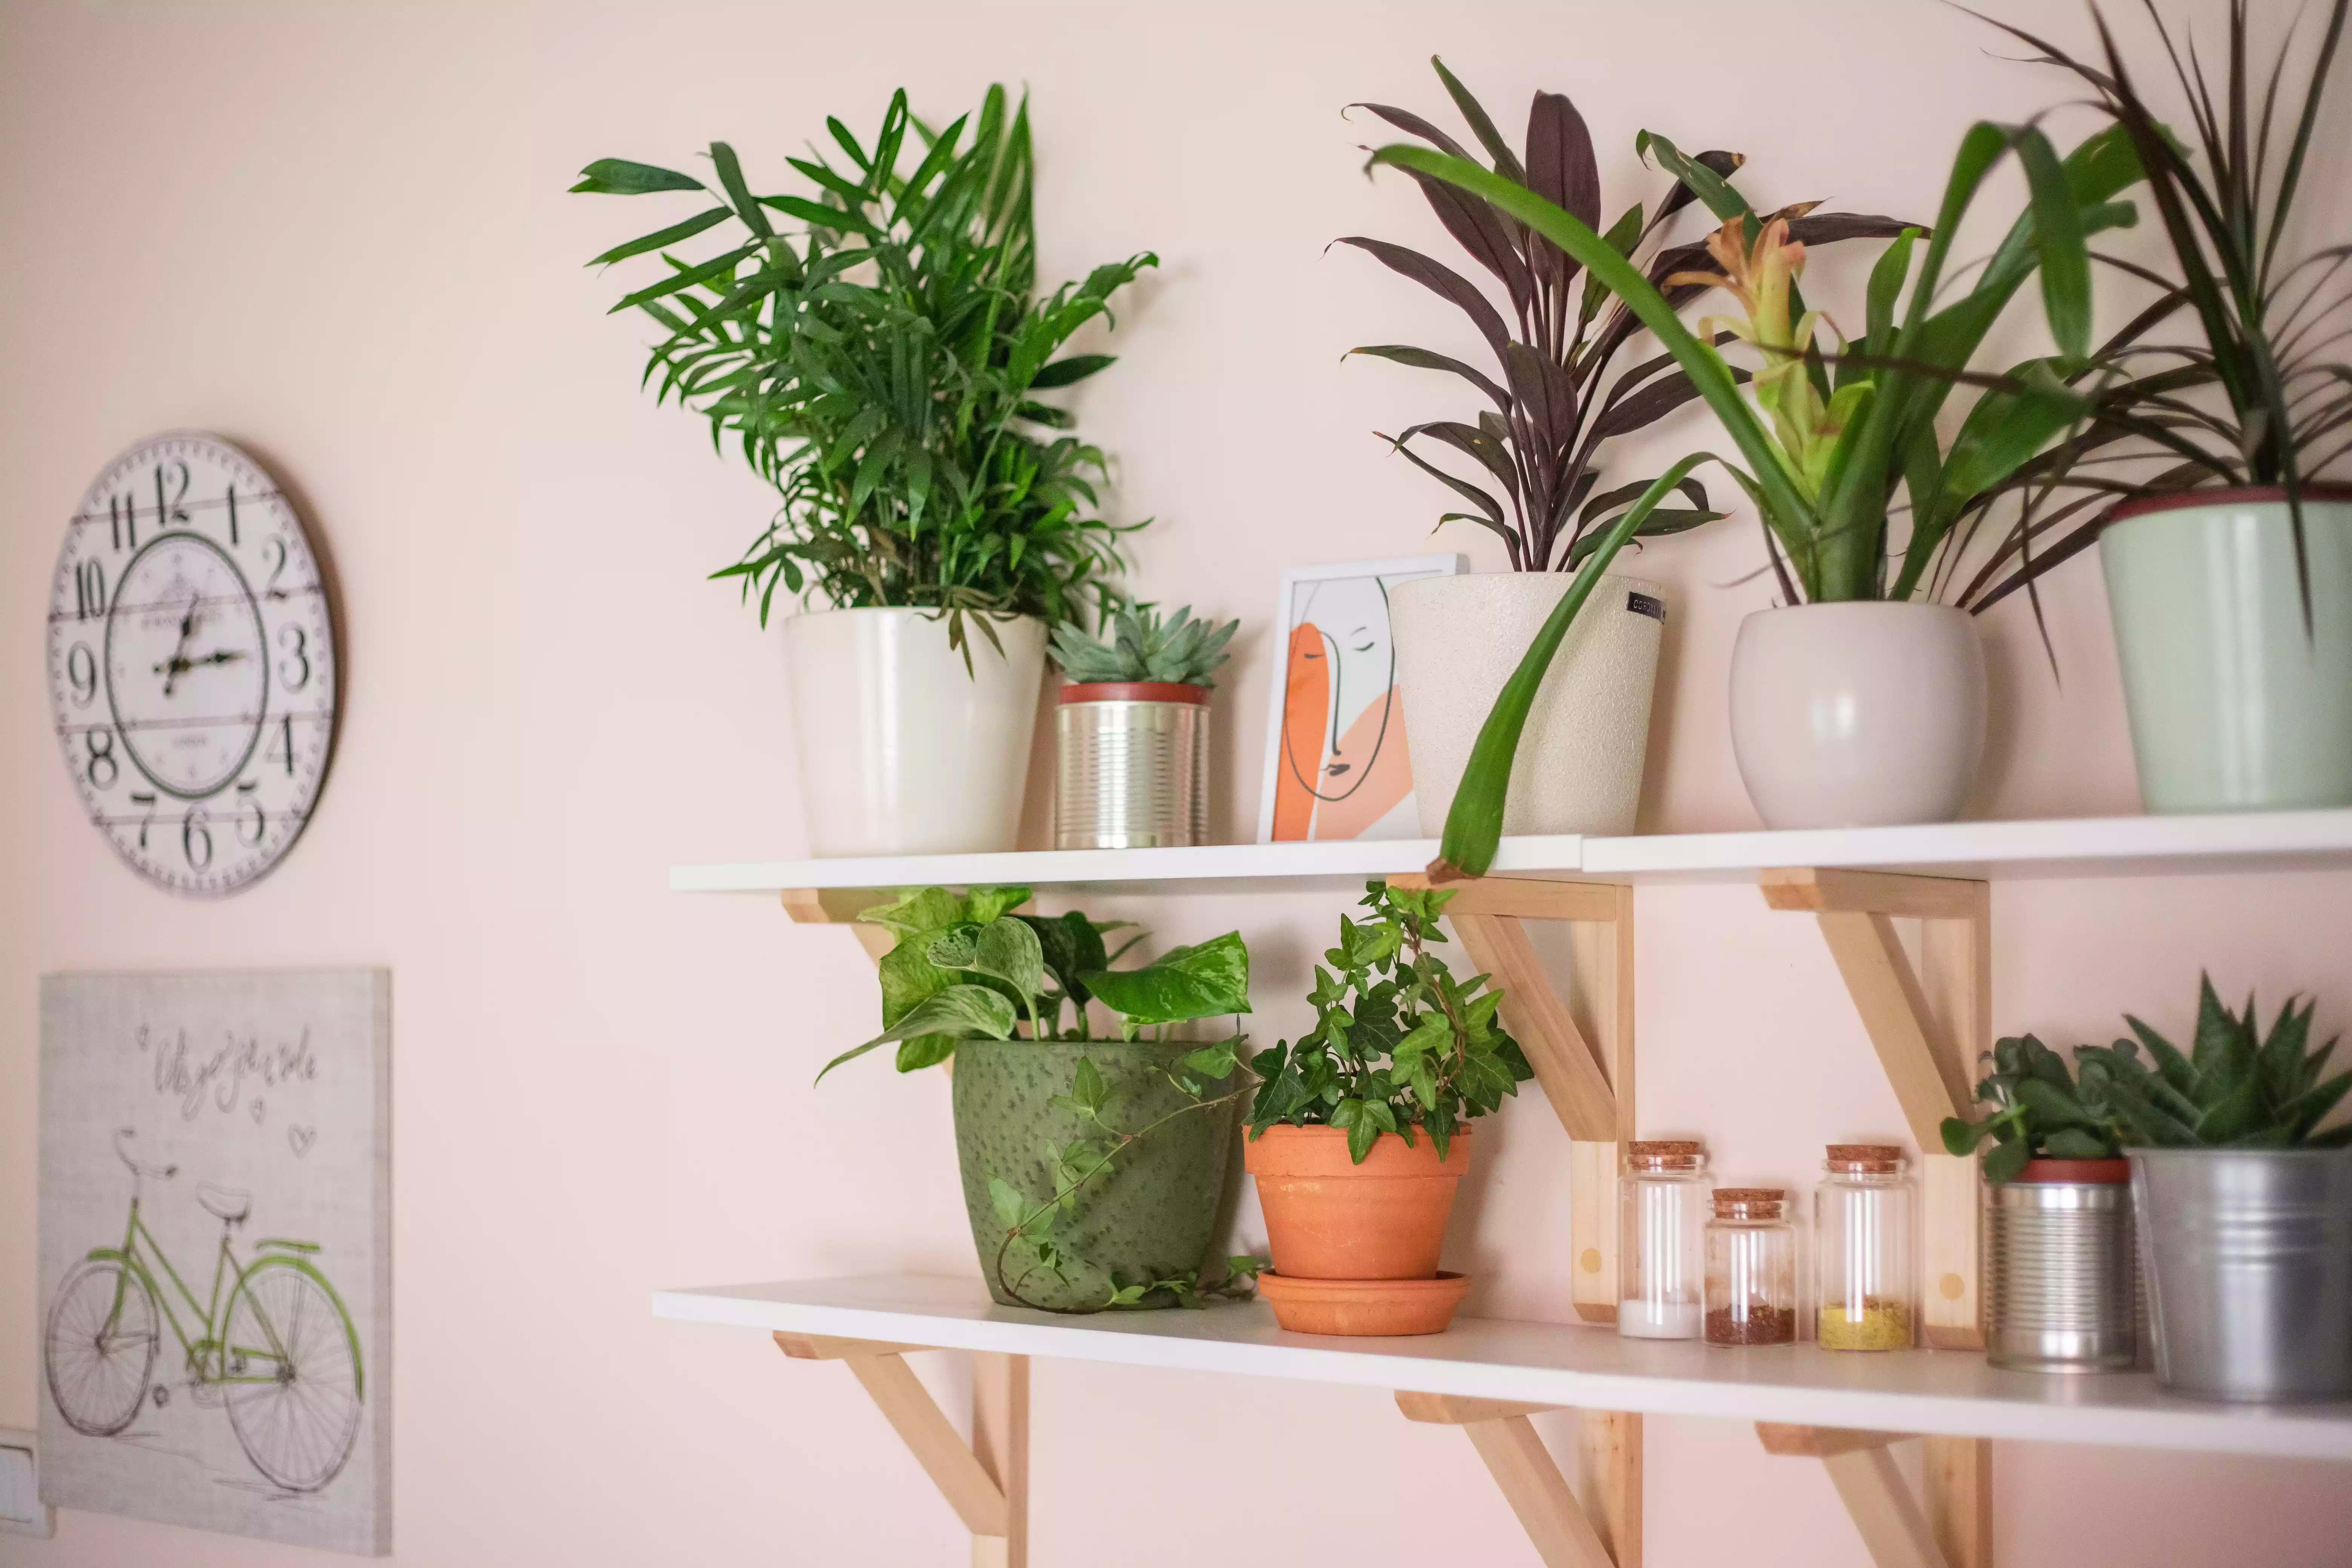 floating shelves filled with assortment of house plants, art, and dry goods